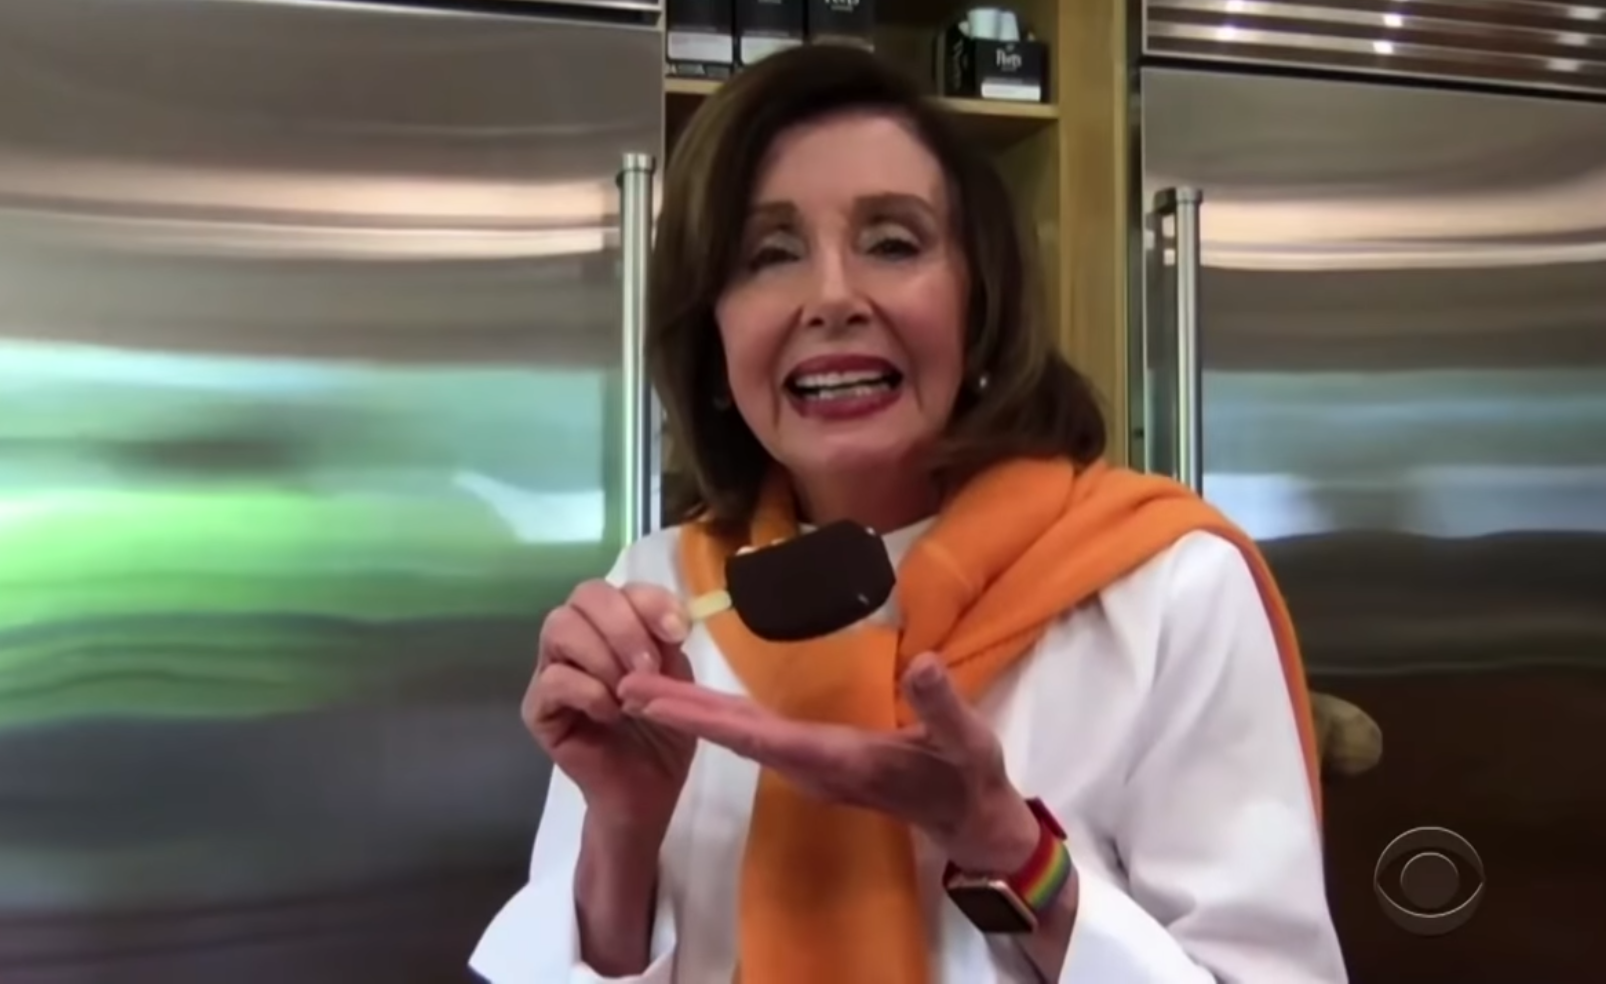 Dear Nancy Pelosi, You Don't Need To Pay $13 A Pint For Good Ice Cream